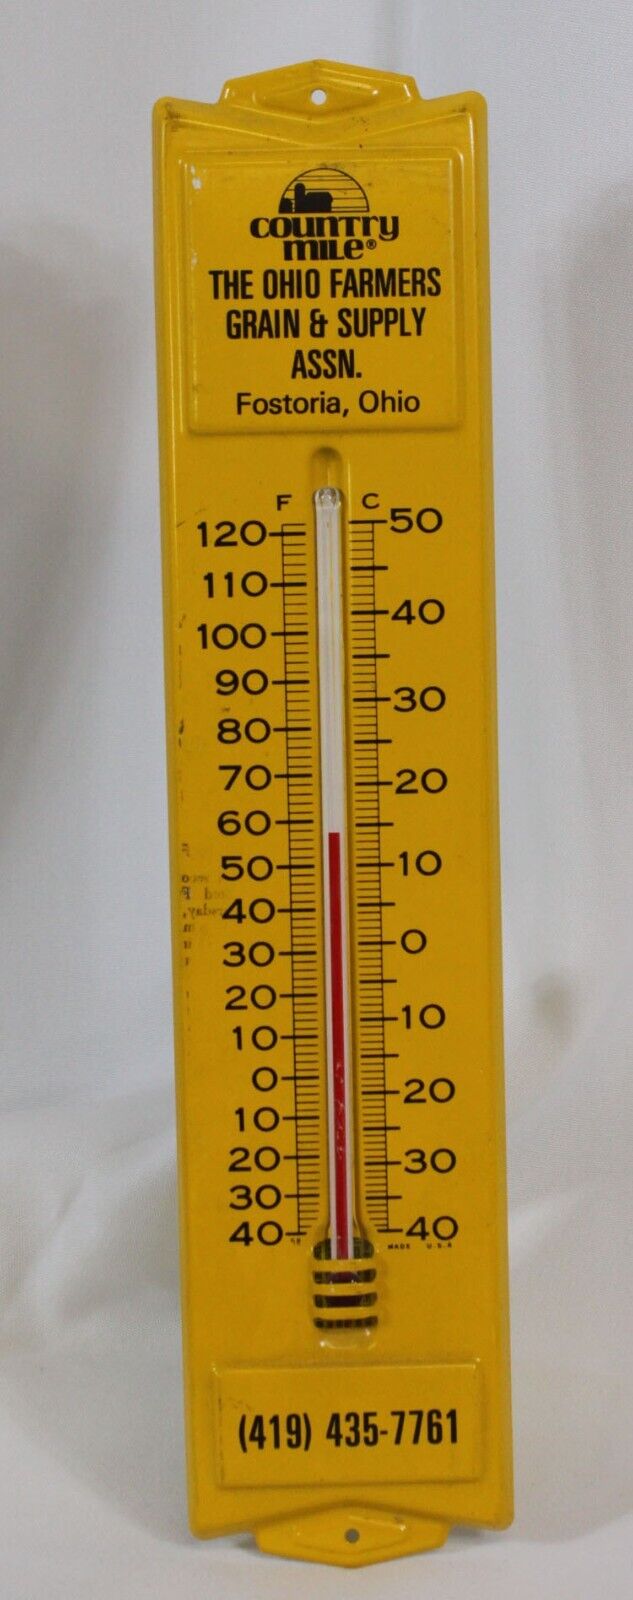 Vtg Thermometer Country Mile Ohio Farmers Grain & Supply Fostoria Metal Tall Old